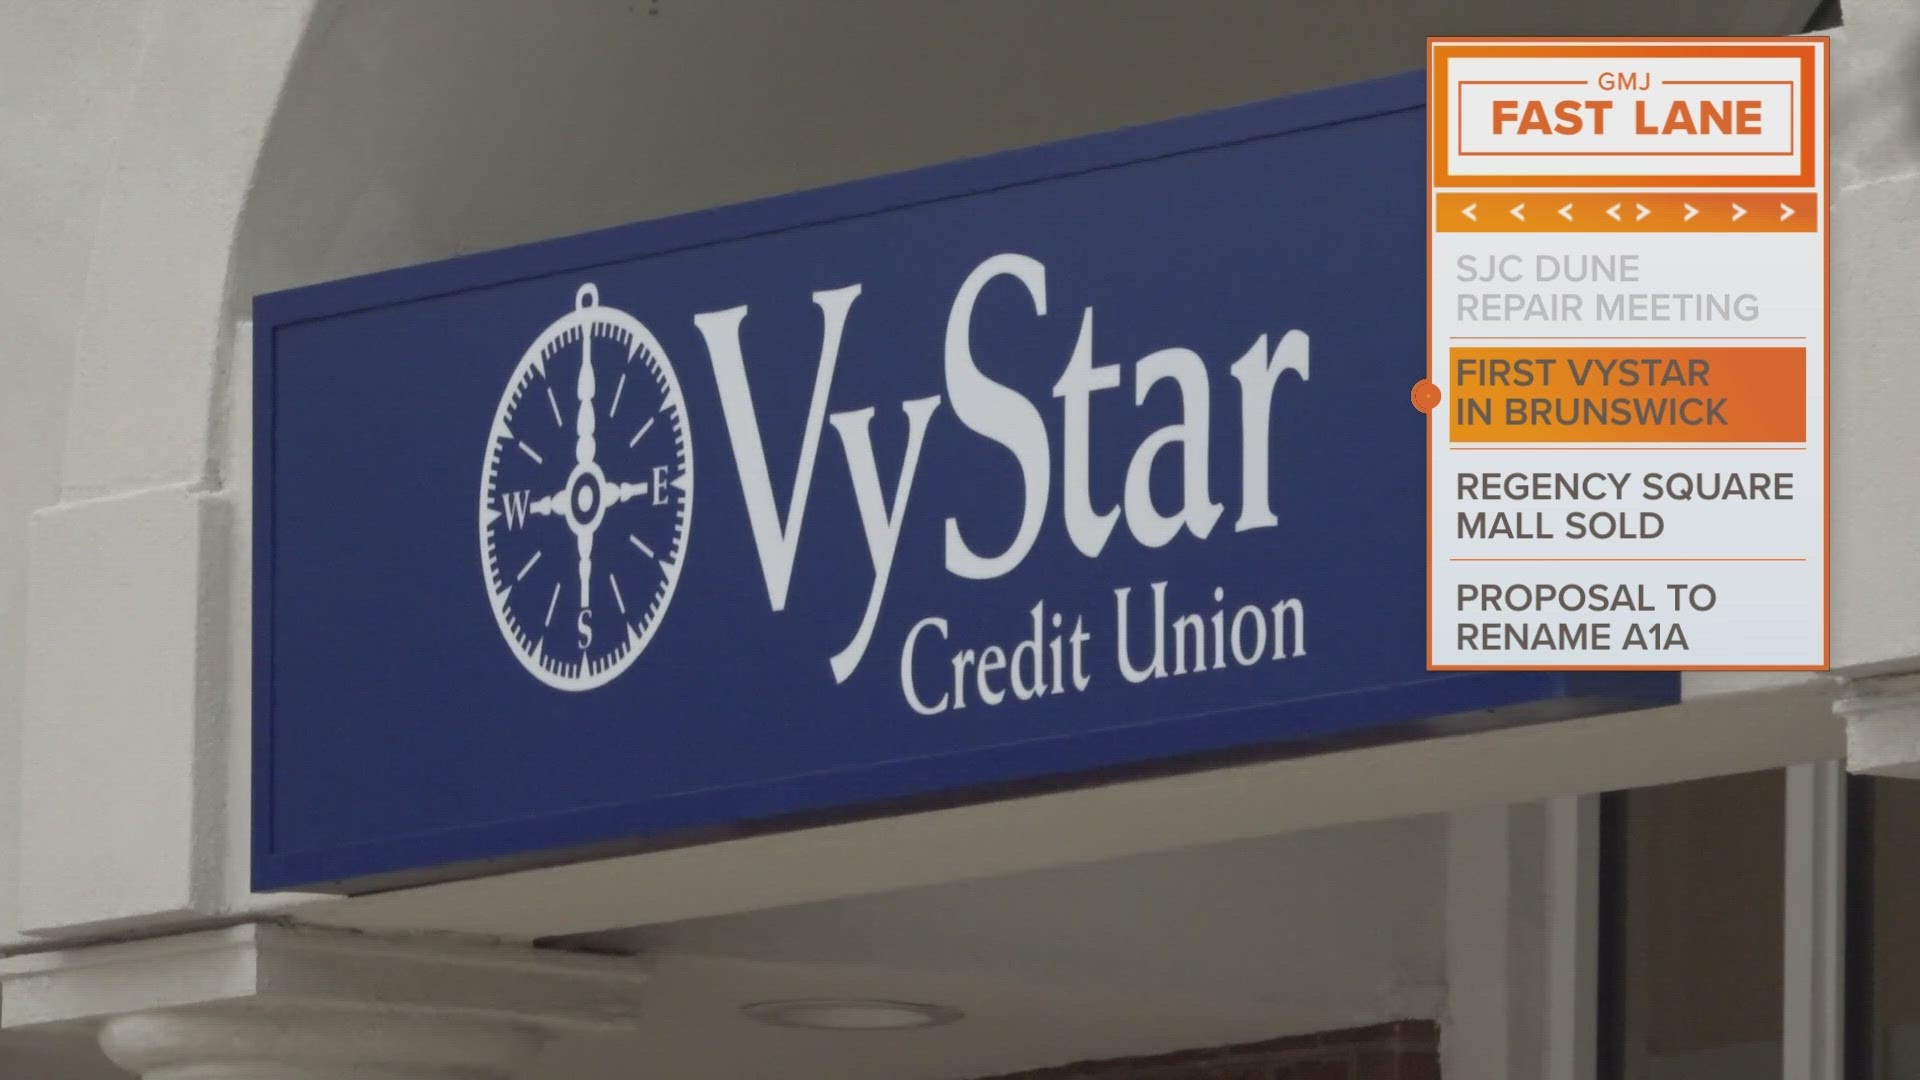 The first-ever Vystar Credit Union in Brunswick, Georgia will have a grand opening on Wednesday.